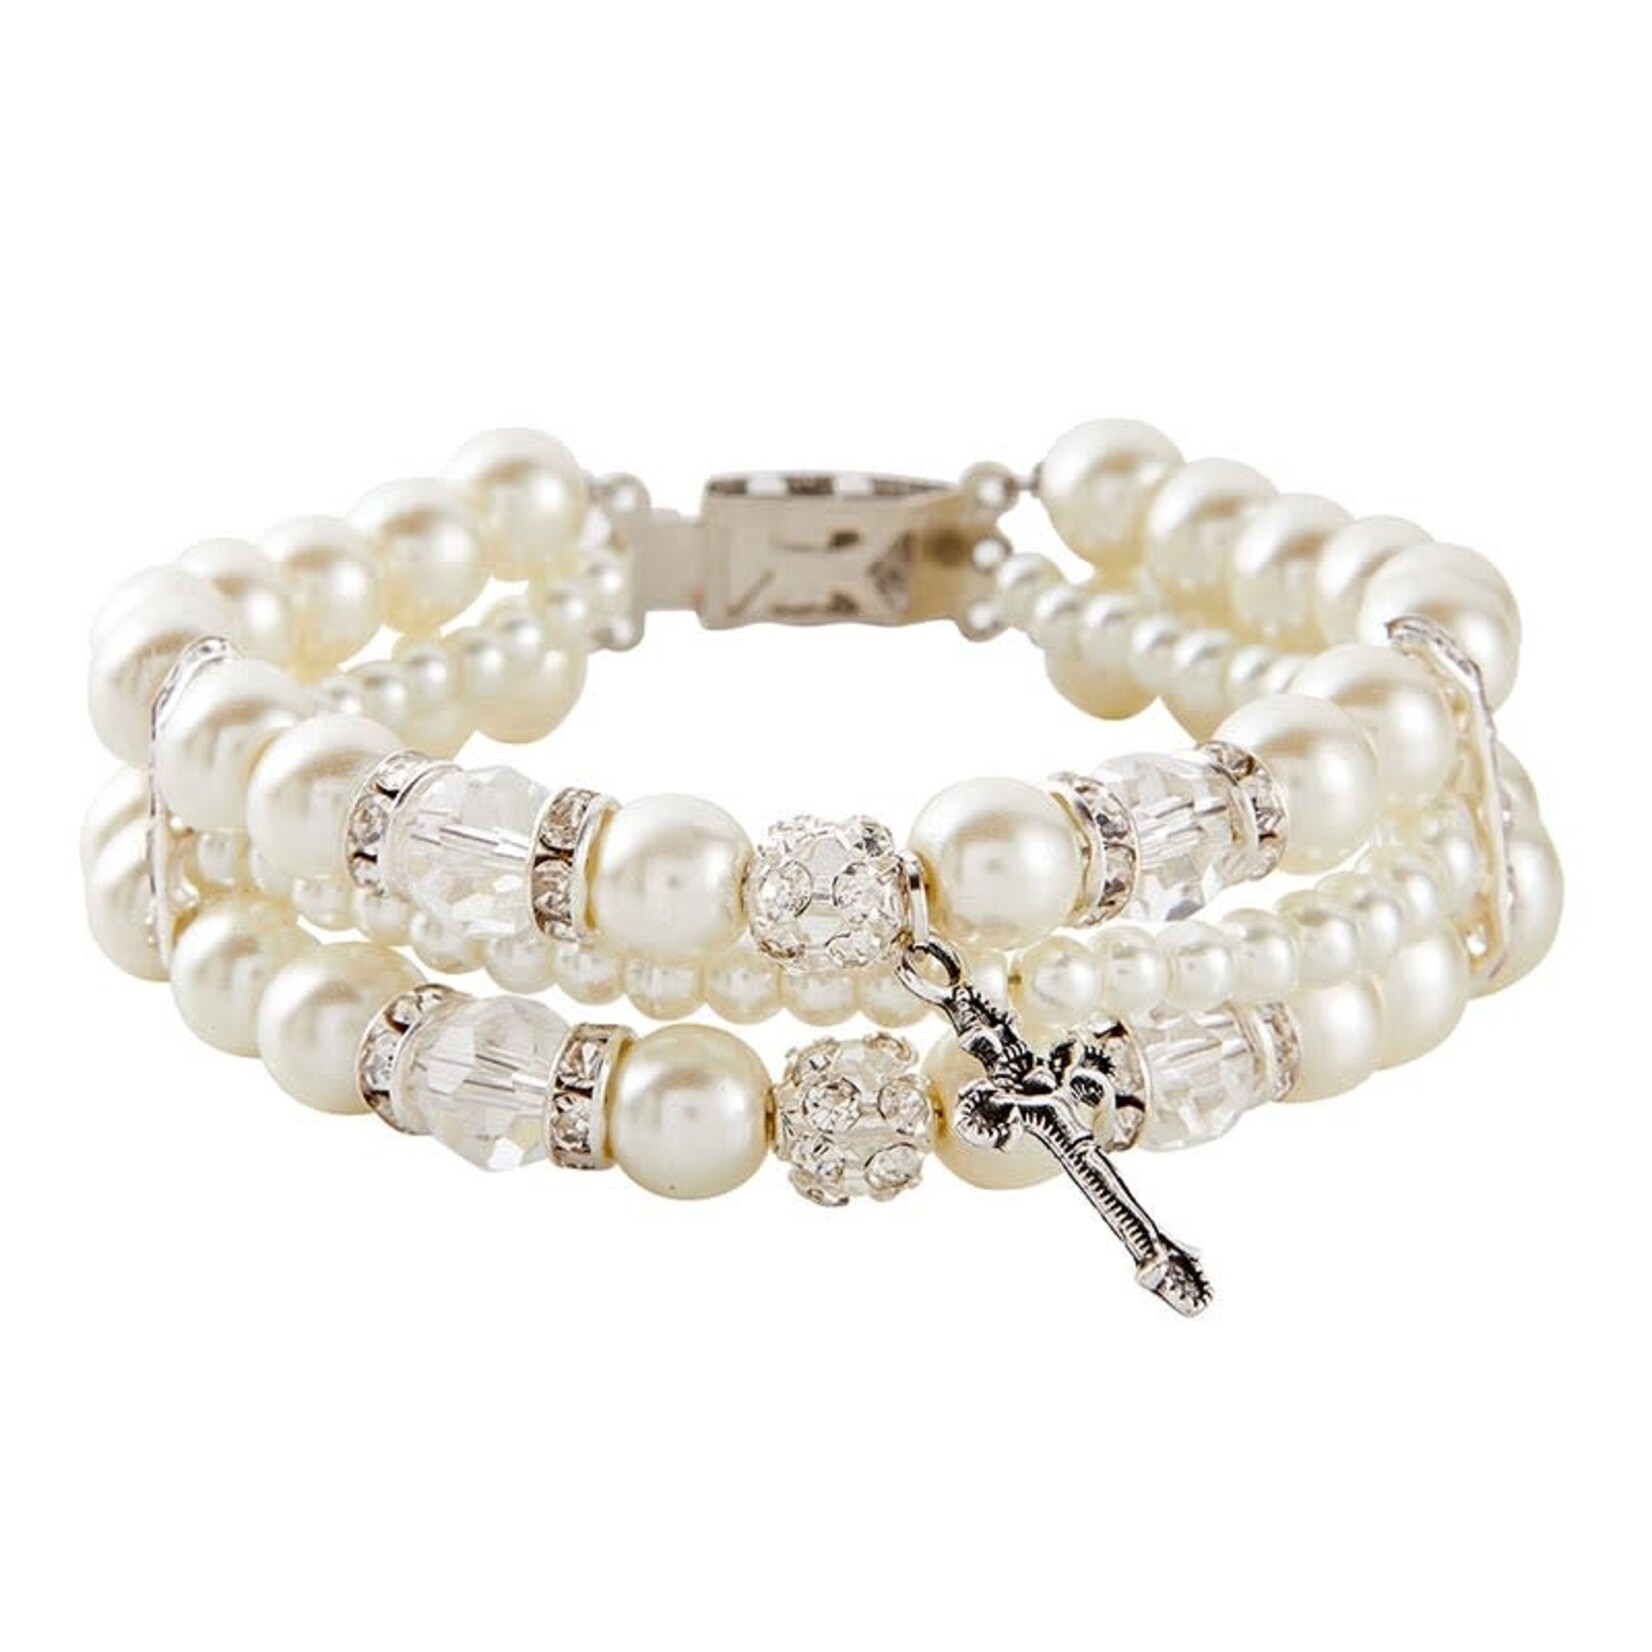 Three Strand Pearl and Crystal Bracelet